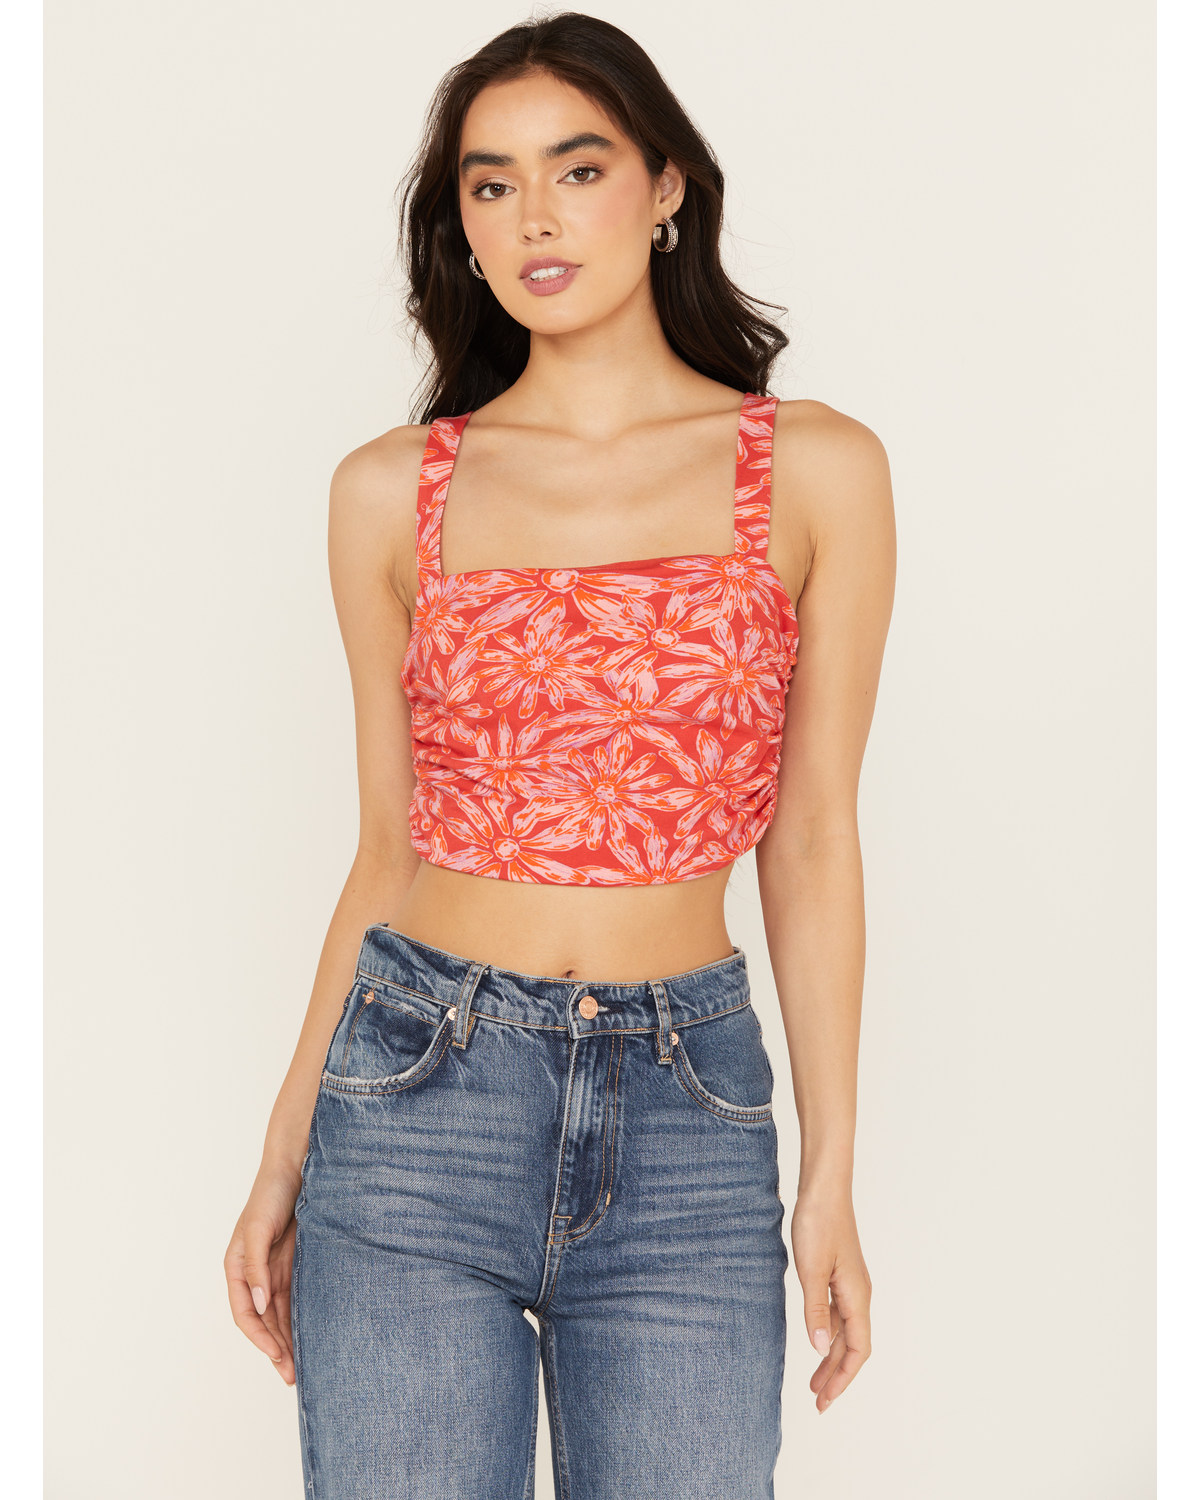 Free People Women's All Tied Up Top